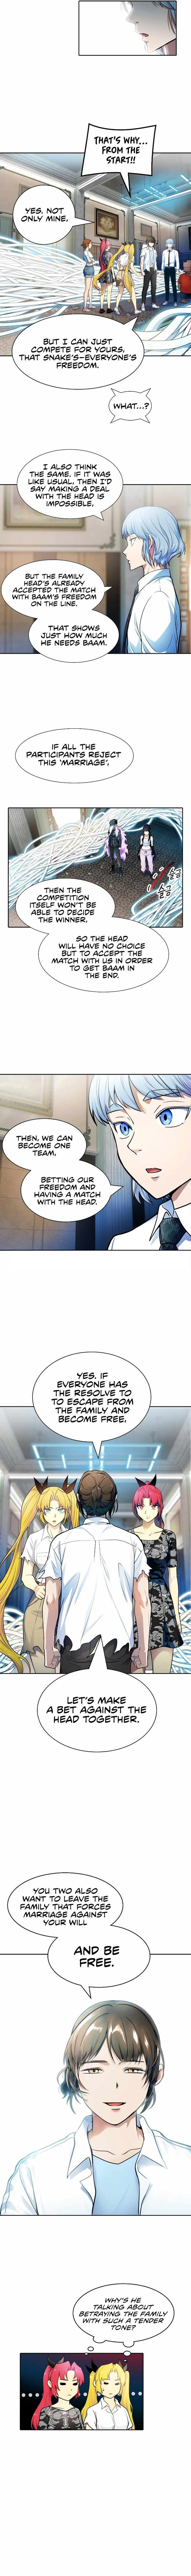 Tower Of God Chapter 570 Page 12